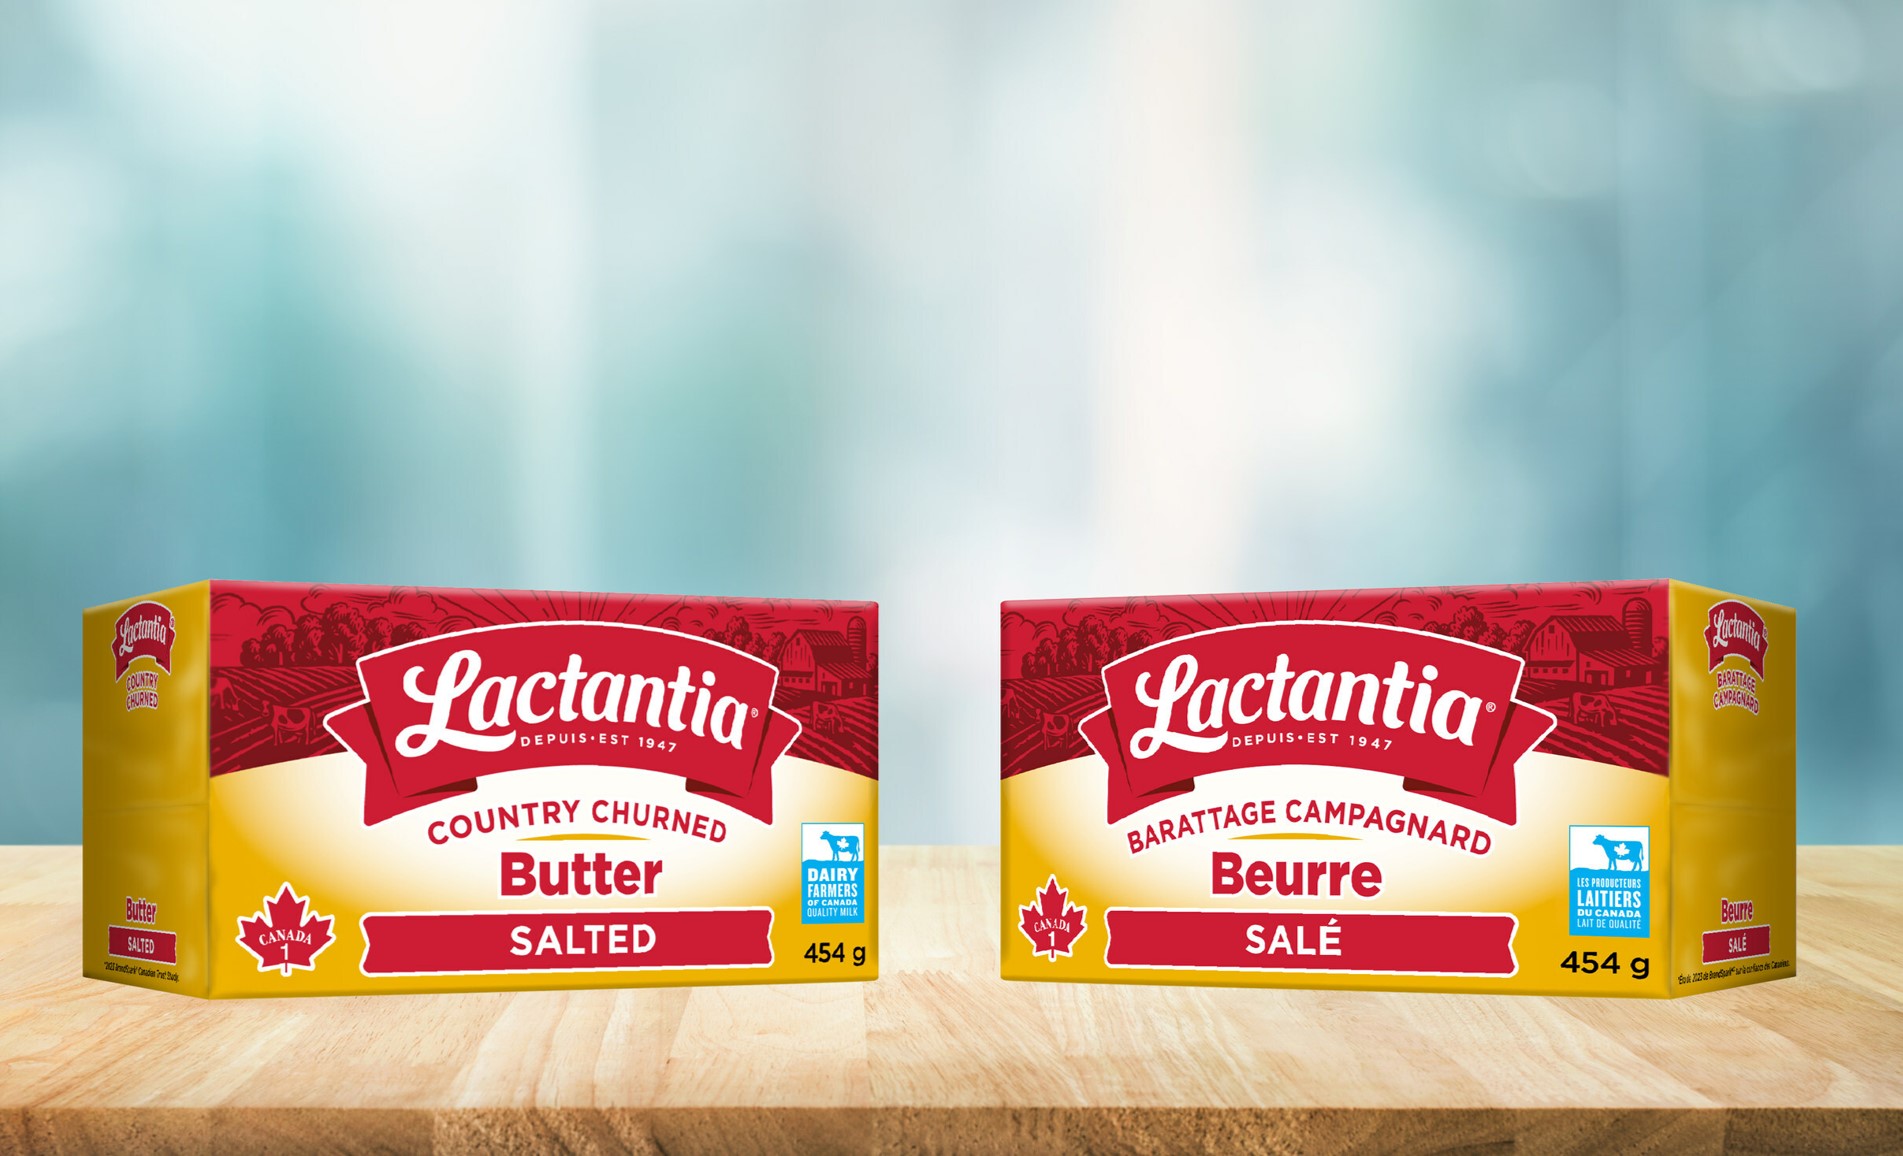 Lactalis Canada's Blue Cow lineup grows as it adds Dairy Farmers of Canada's iconic logo to Lactantia butter products